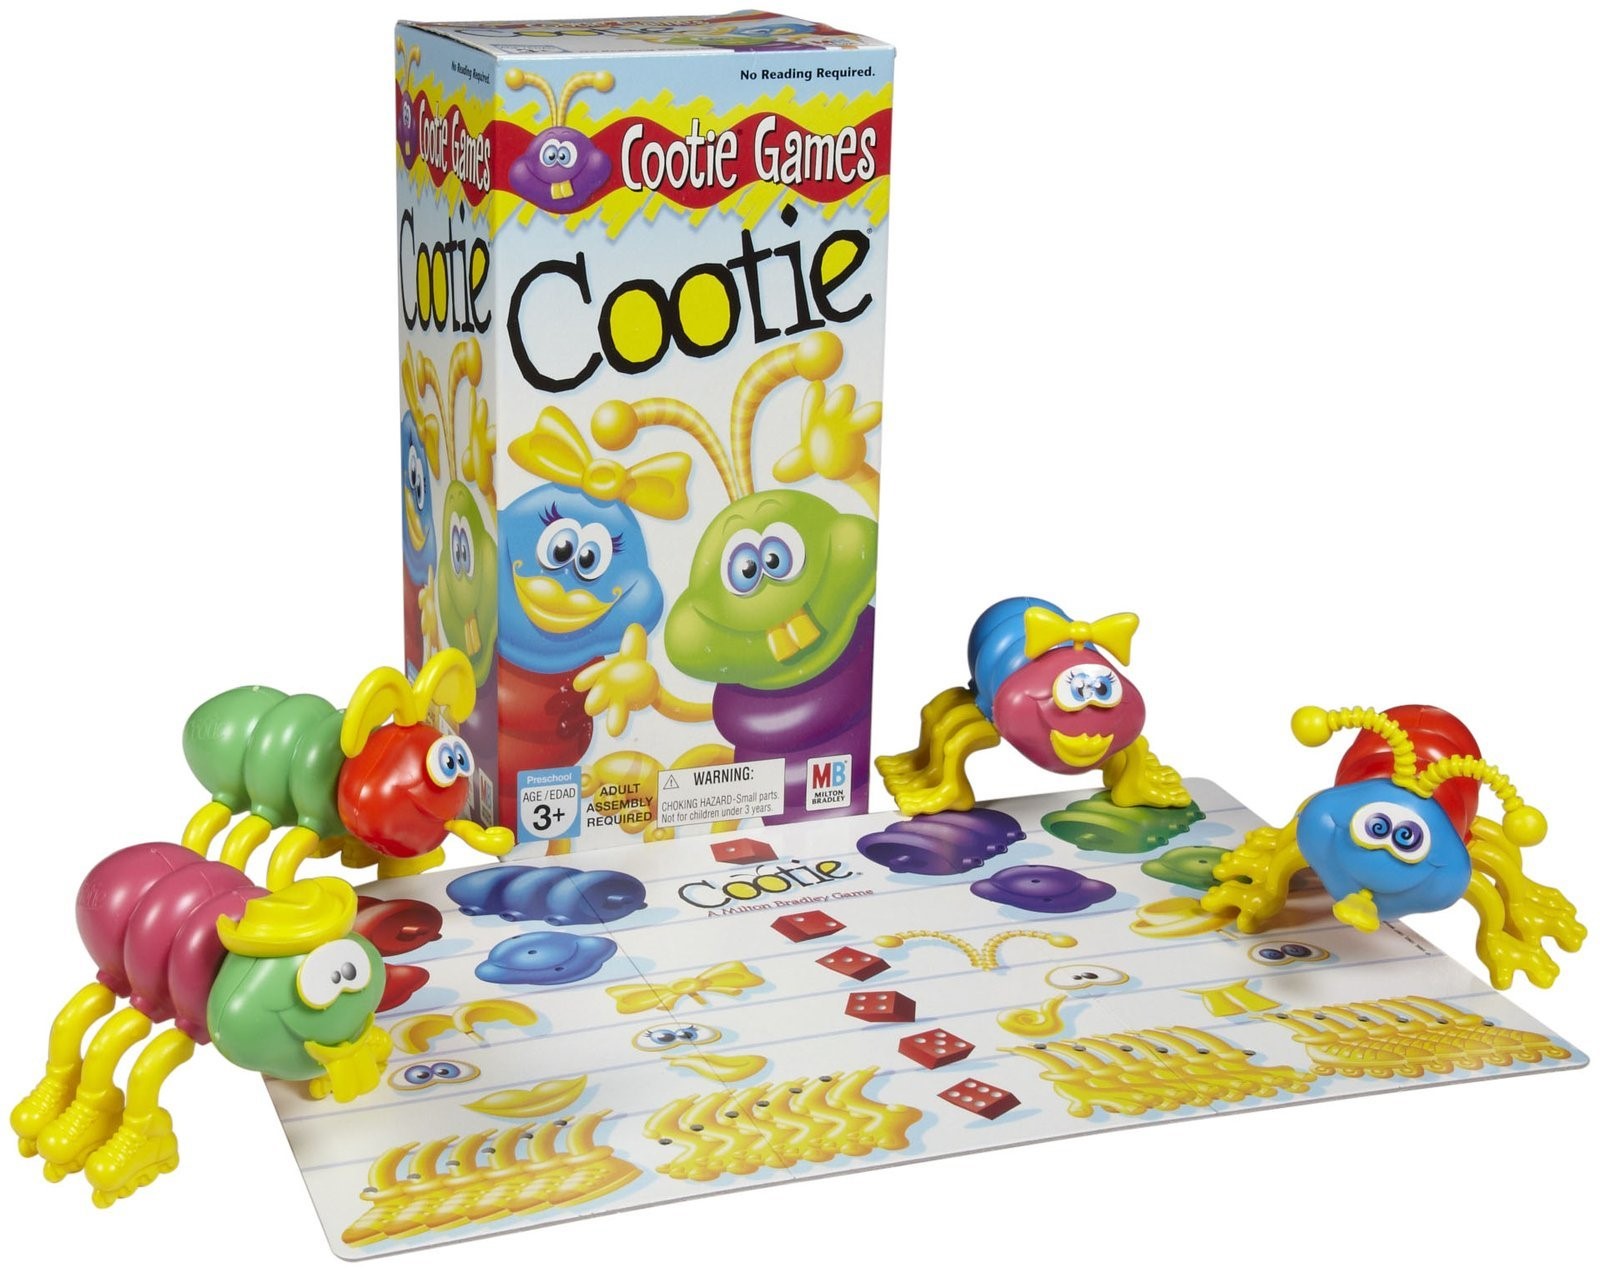 15-mind-blowing-facts-about-cootie